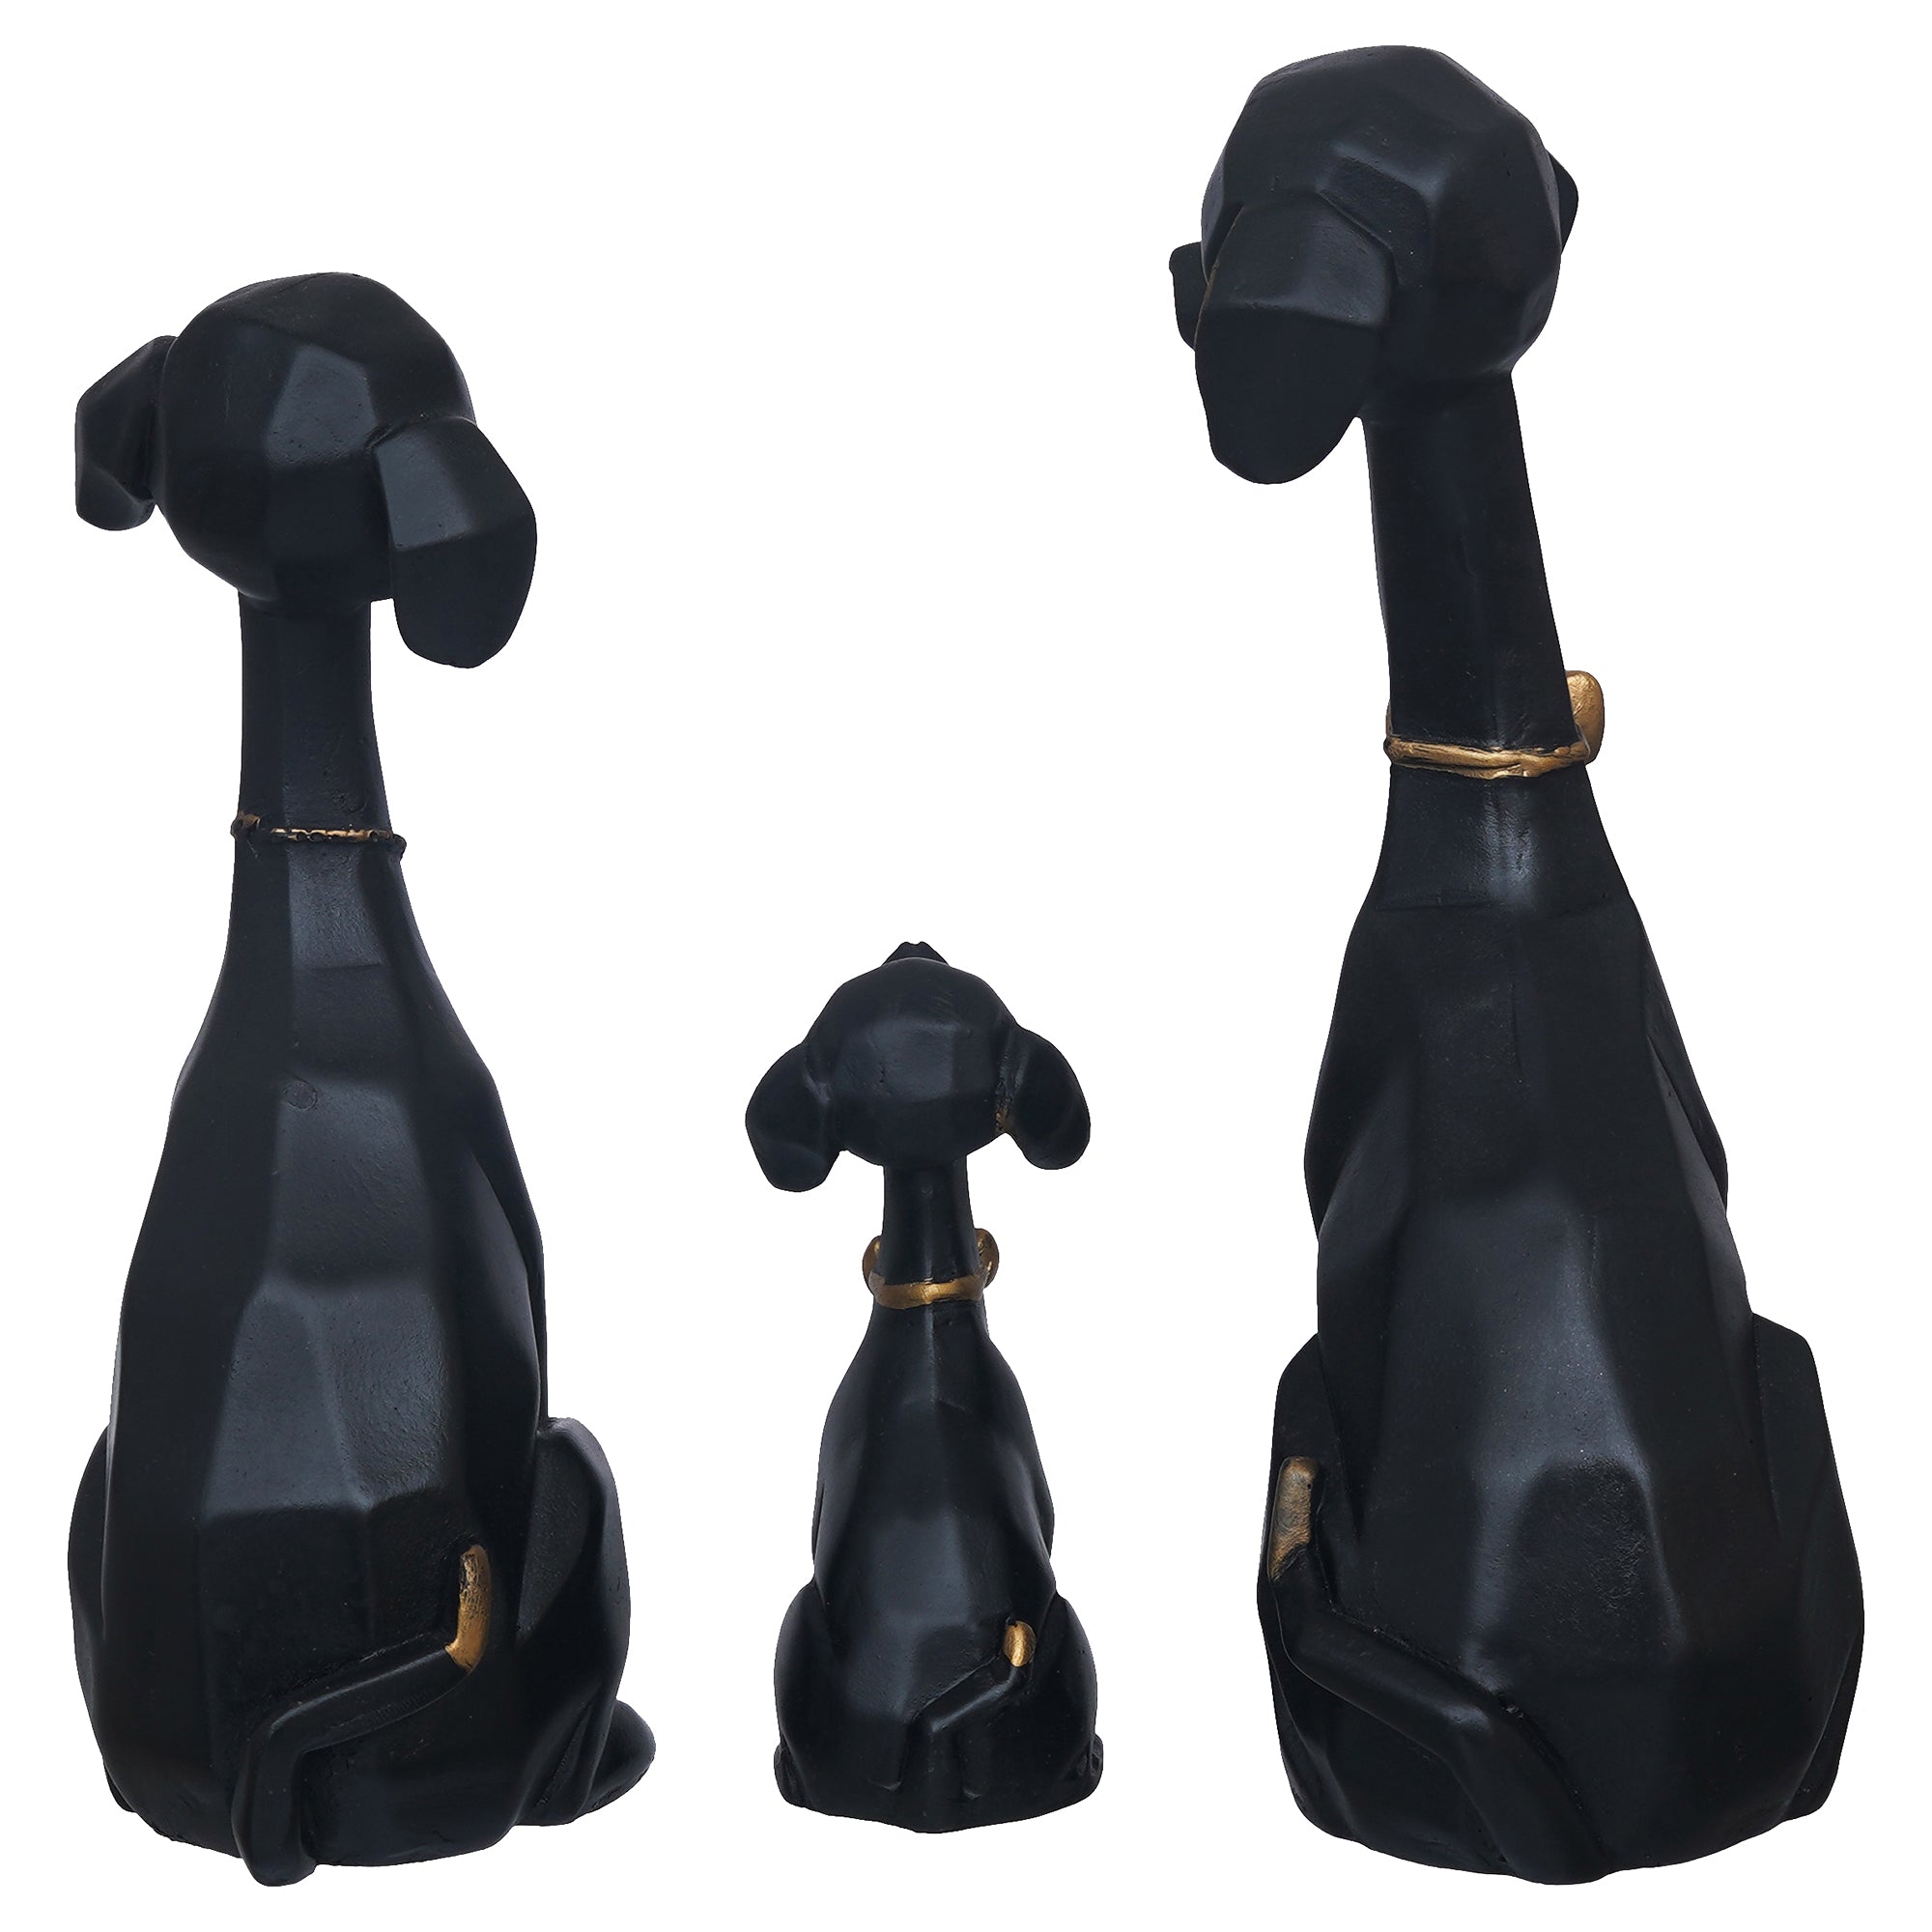 eCraftIndia Black and Golden Set of 3 Cute Dog Statues Animal Figurines Decorative Showpieces for Home Decor 8